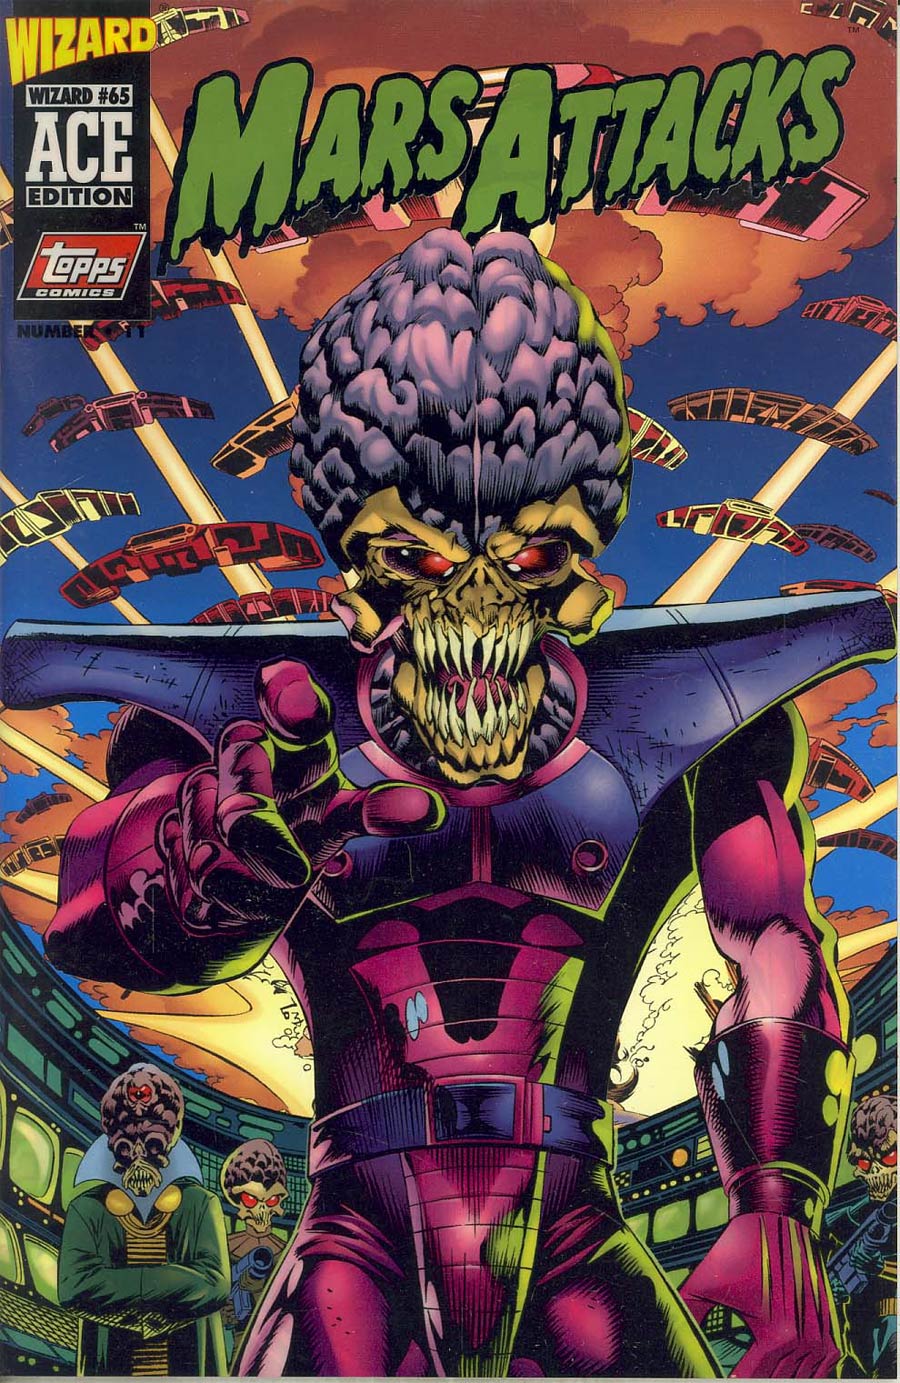 Mars Attacks #1 Cover C Wizard Ace Edition